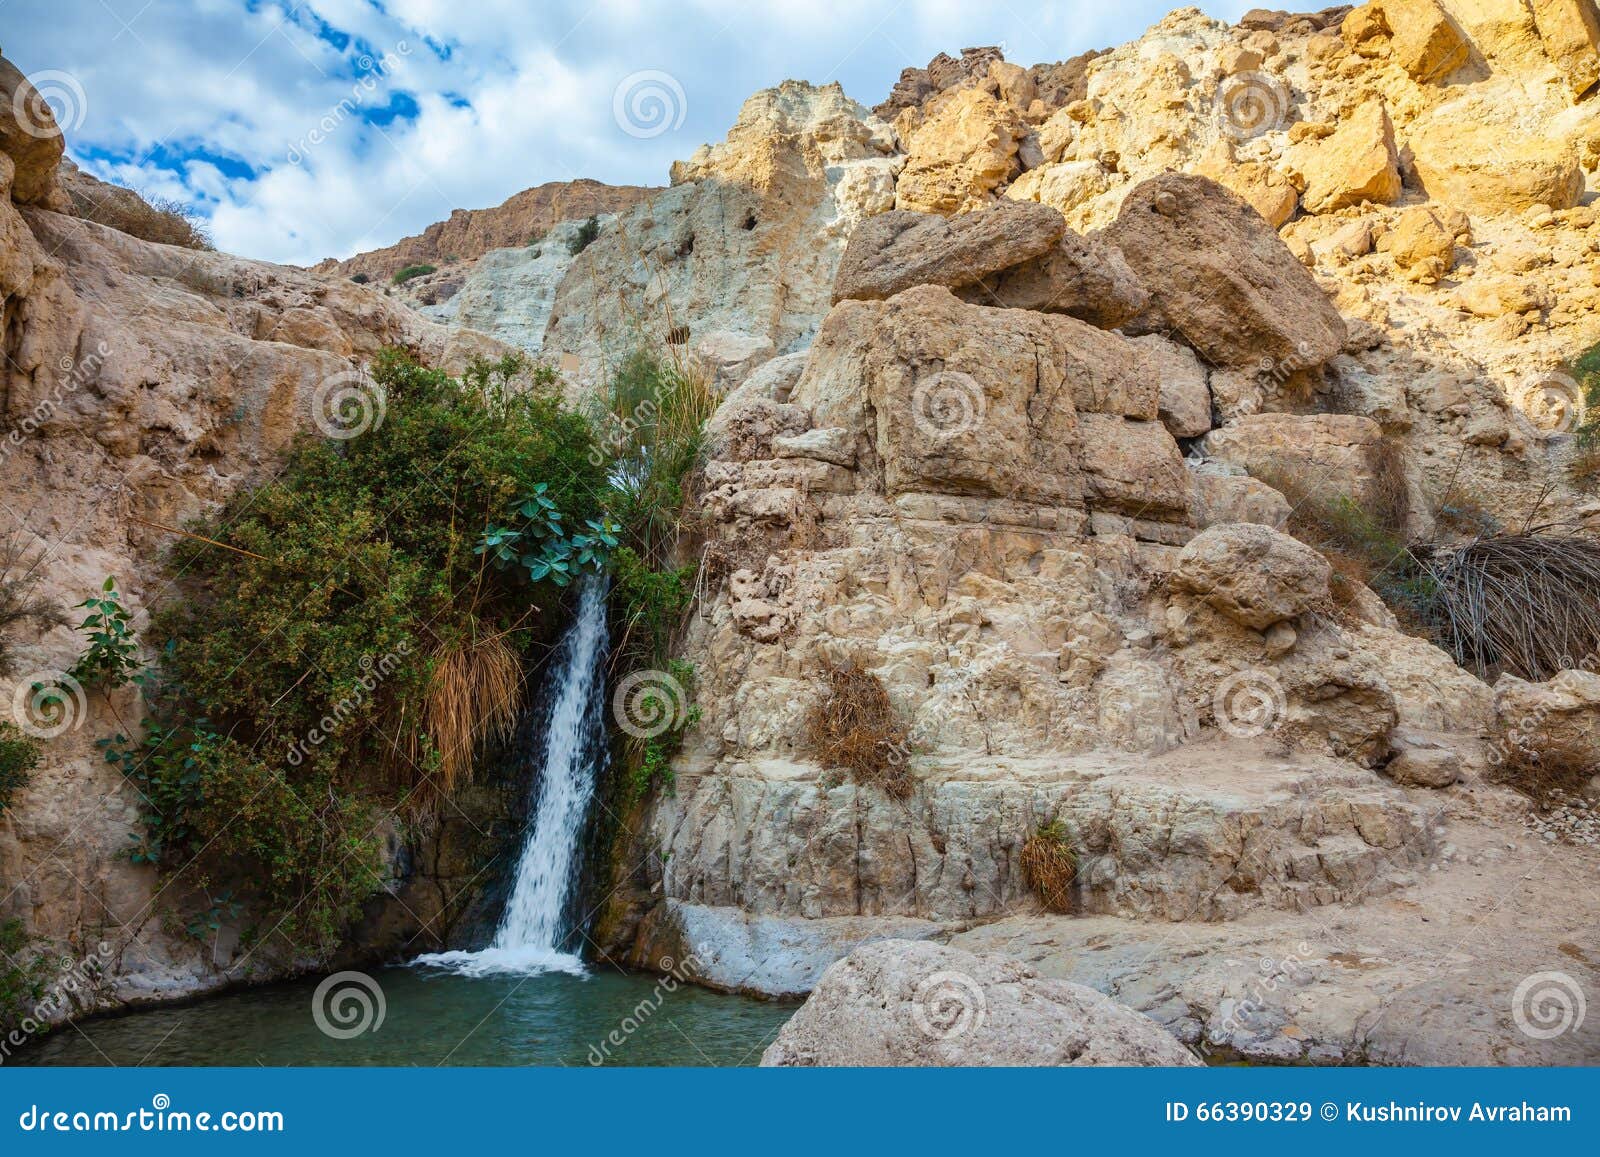 the national park and reserves ein gedi, israel